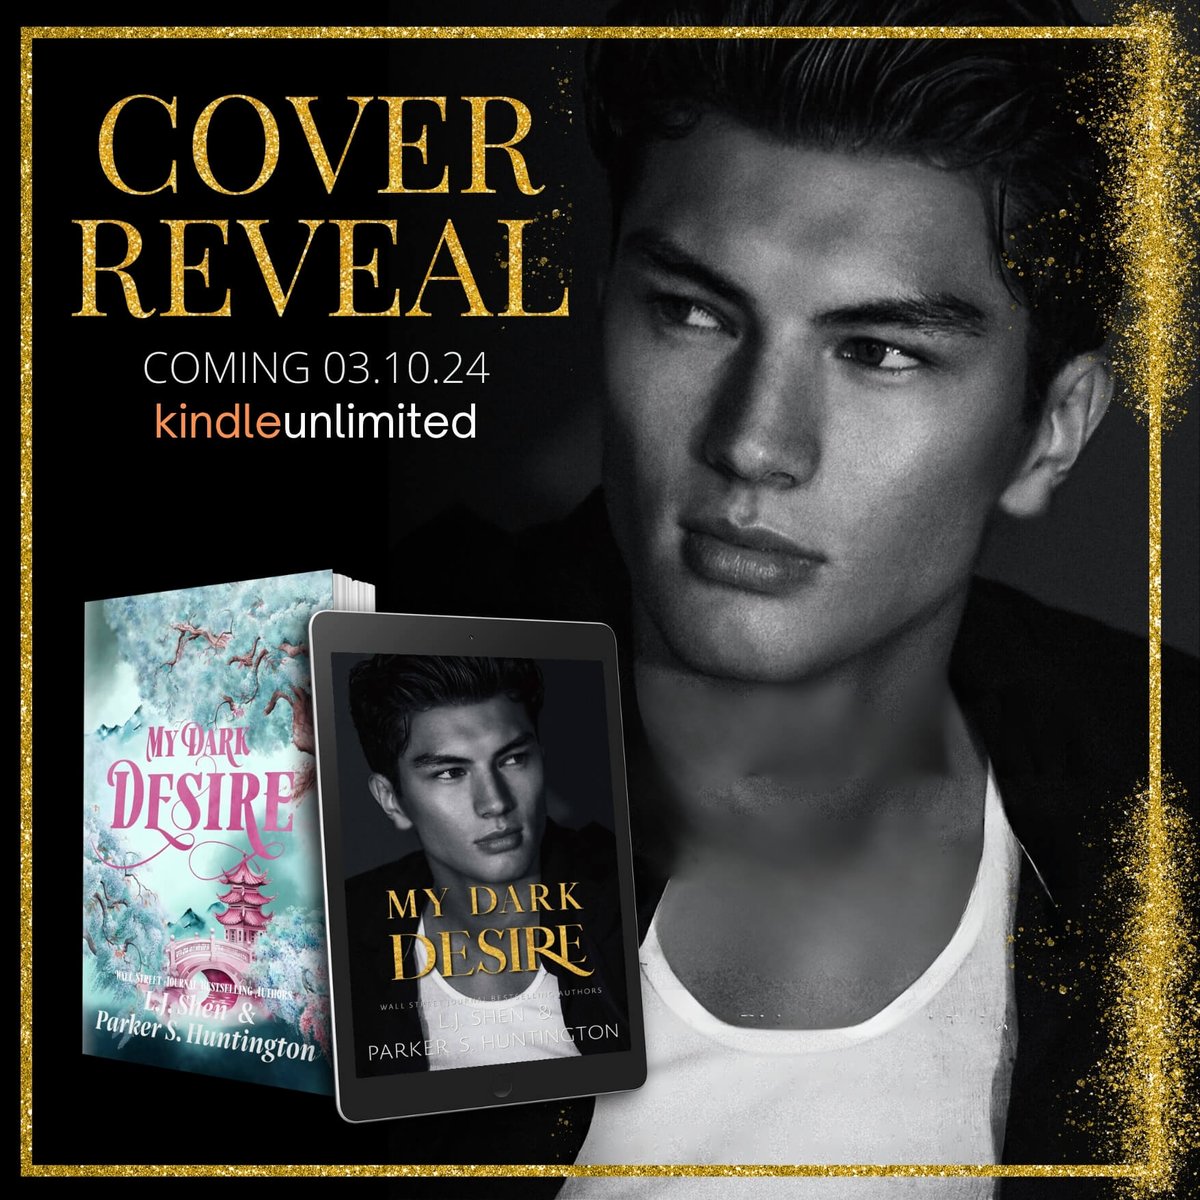 ✨Ebook Cover Reveal
MY DARK DESIRE by Parker S. Huntington and L.J. Shen coming 3/10!
#PreOrderHere
Amazon US: shor.by/MDDprint
Amazon UK: shor.by/MDDUKPrint
#bookish #theauthoragency